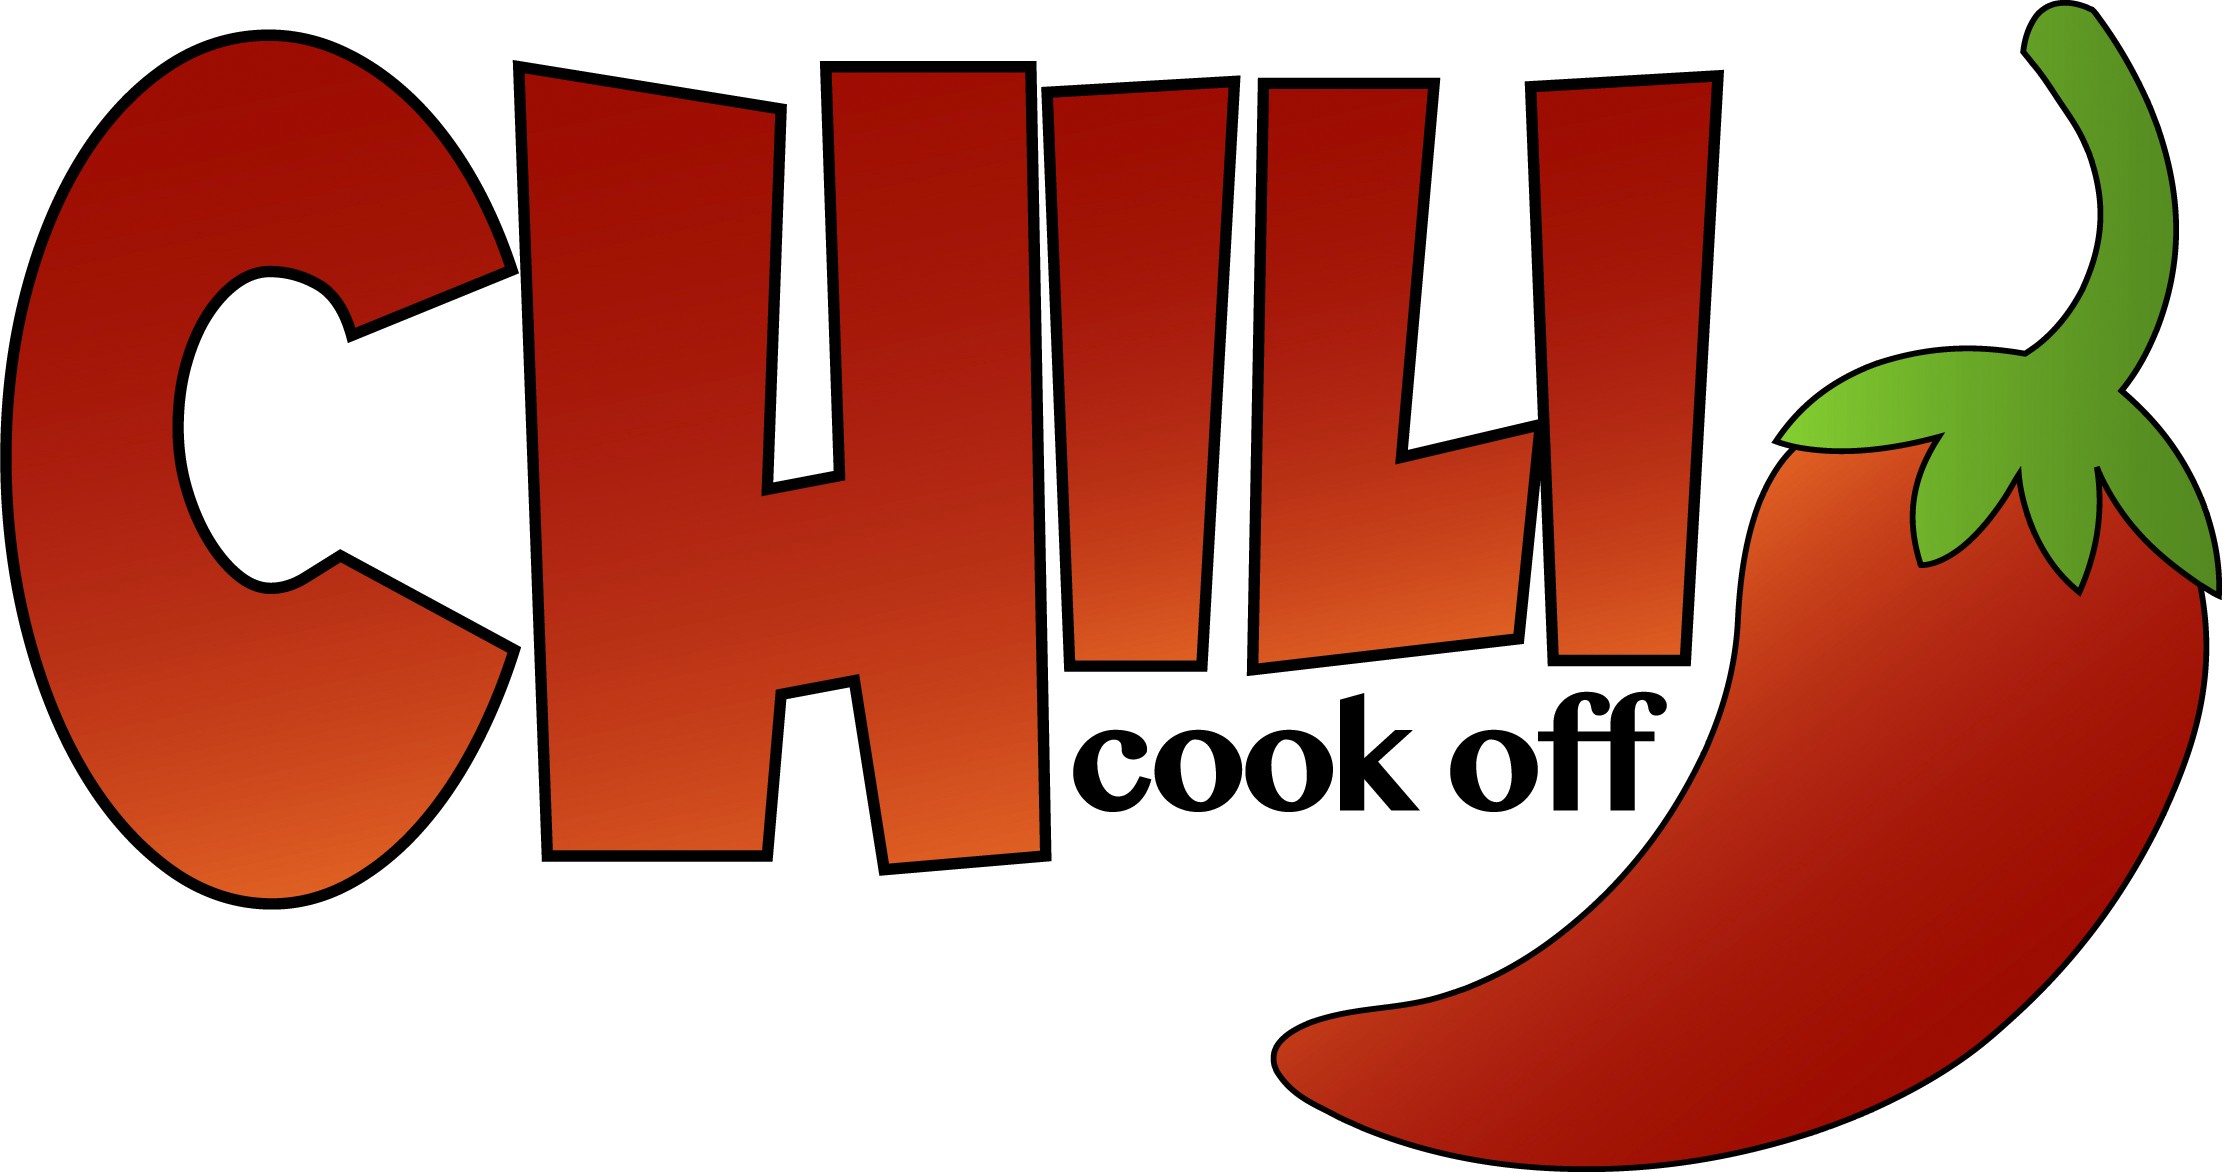 2223x1172 Chili Cook Off Logo Vector Art Getty Images Cool Clipart.